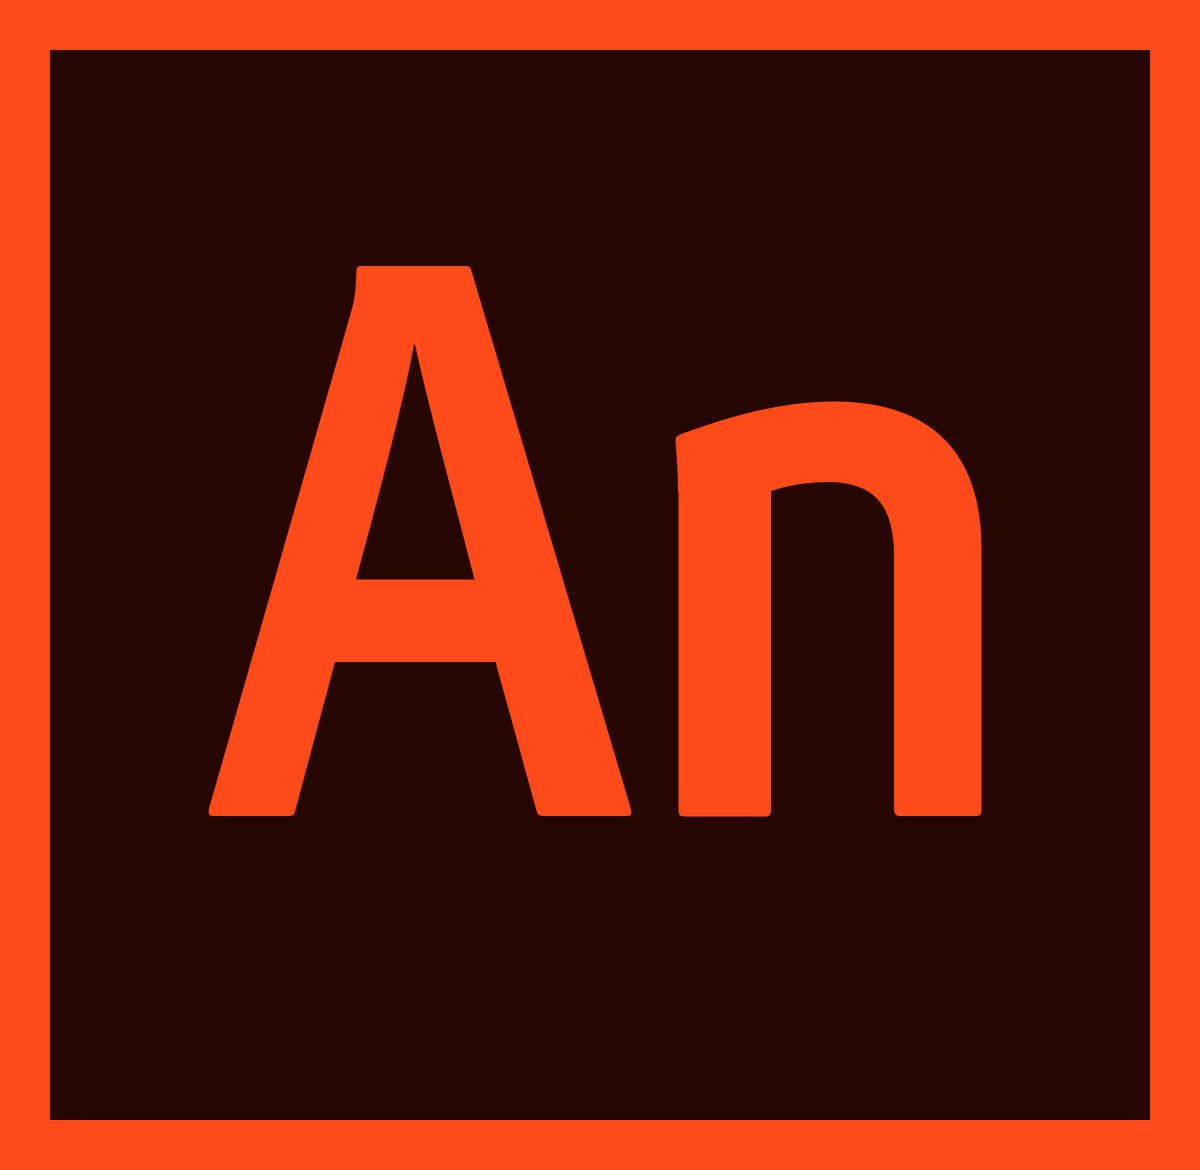 Adobe Animate CC (2019) (Permanent License) No More Subsription Fees.(Tangible Item)